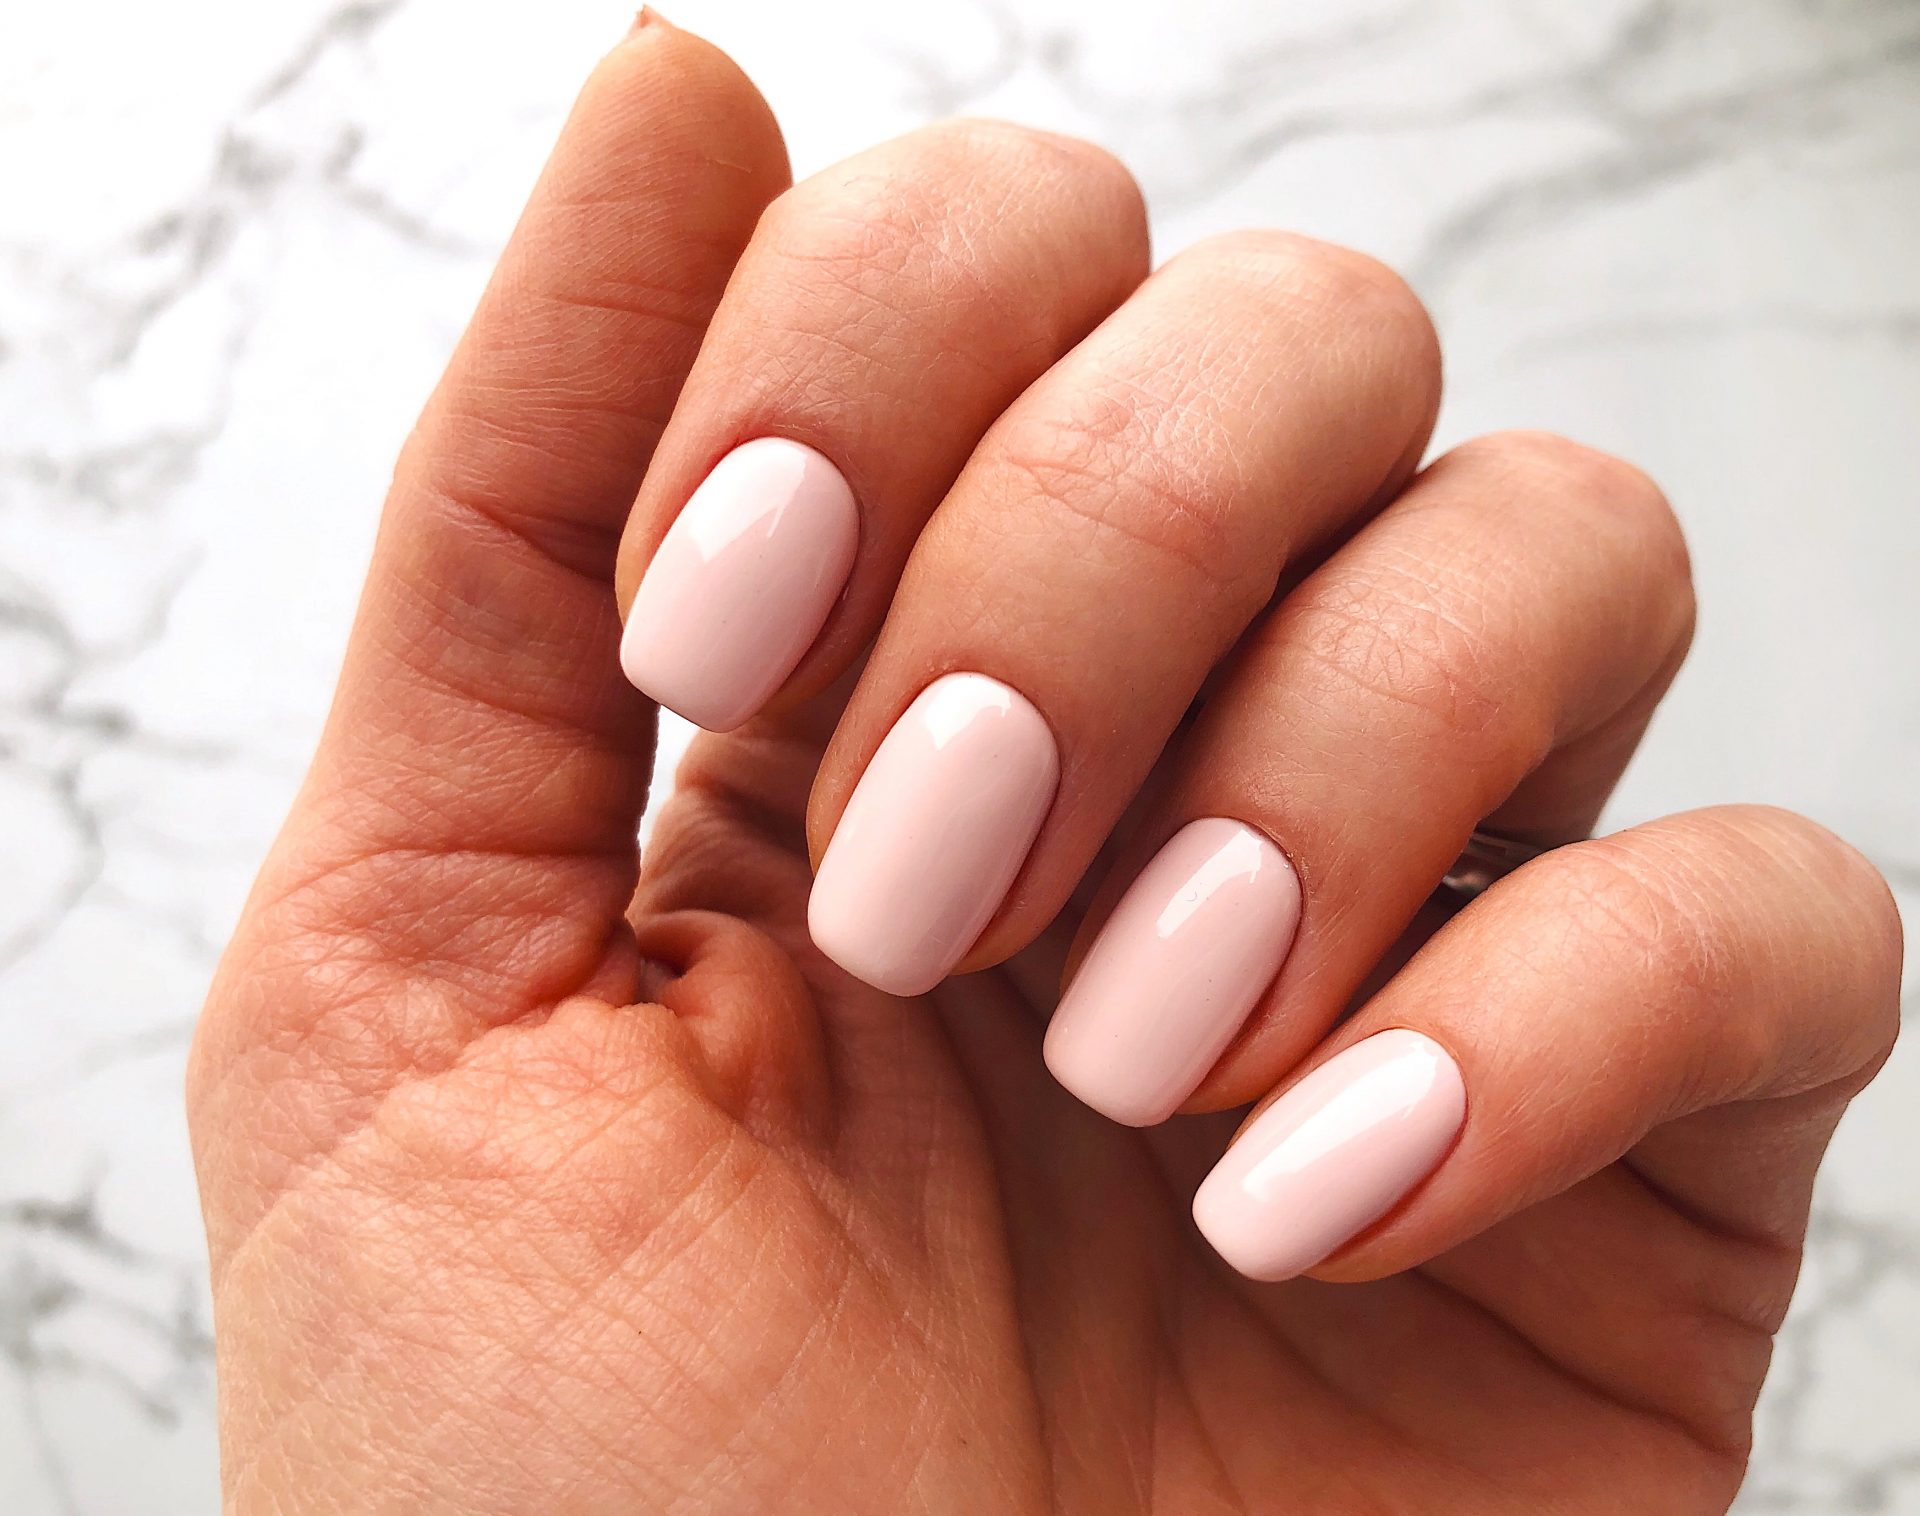 What are BIAB nails and how are they different from gel/shellac?